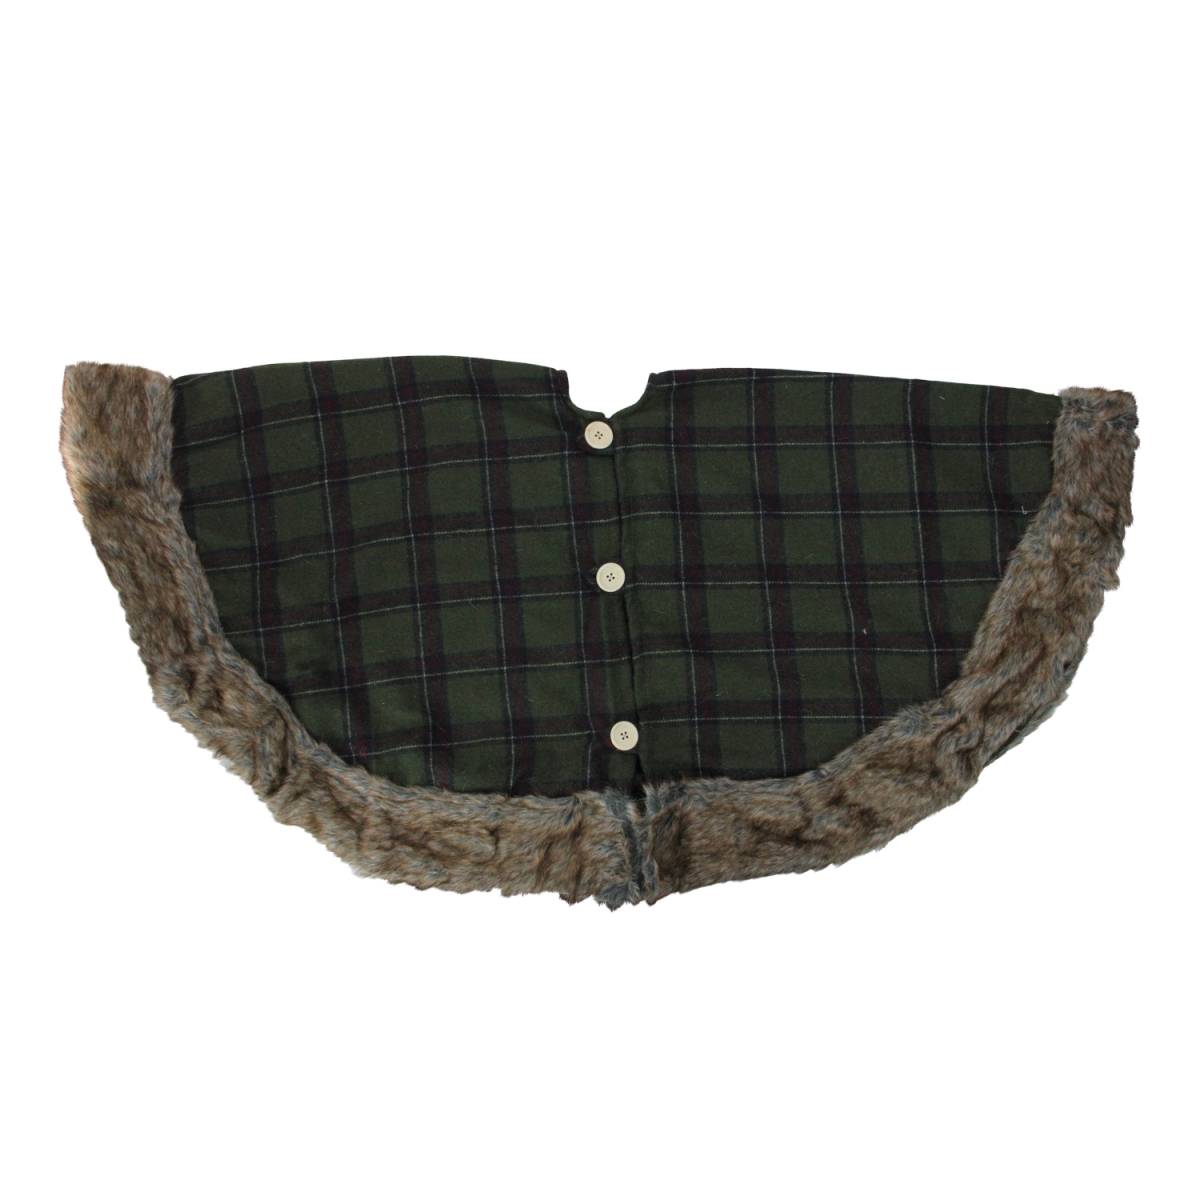 32913567 47 In. Green Plaid Christmas Tree Skirt With Faux Fur Border